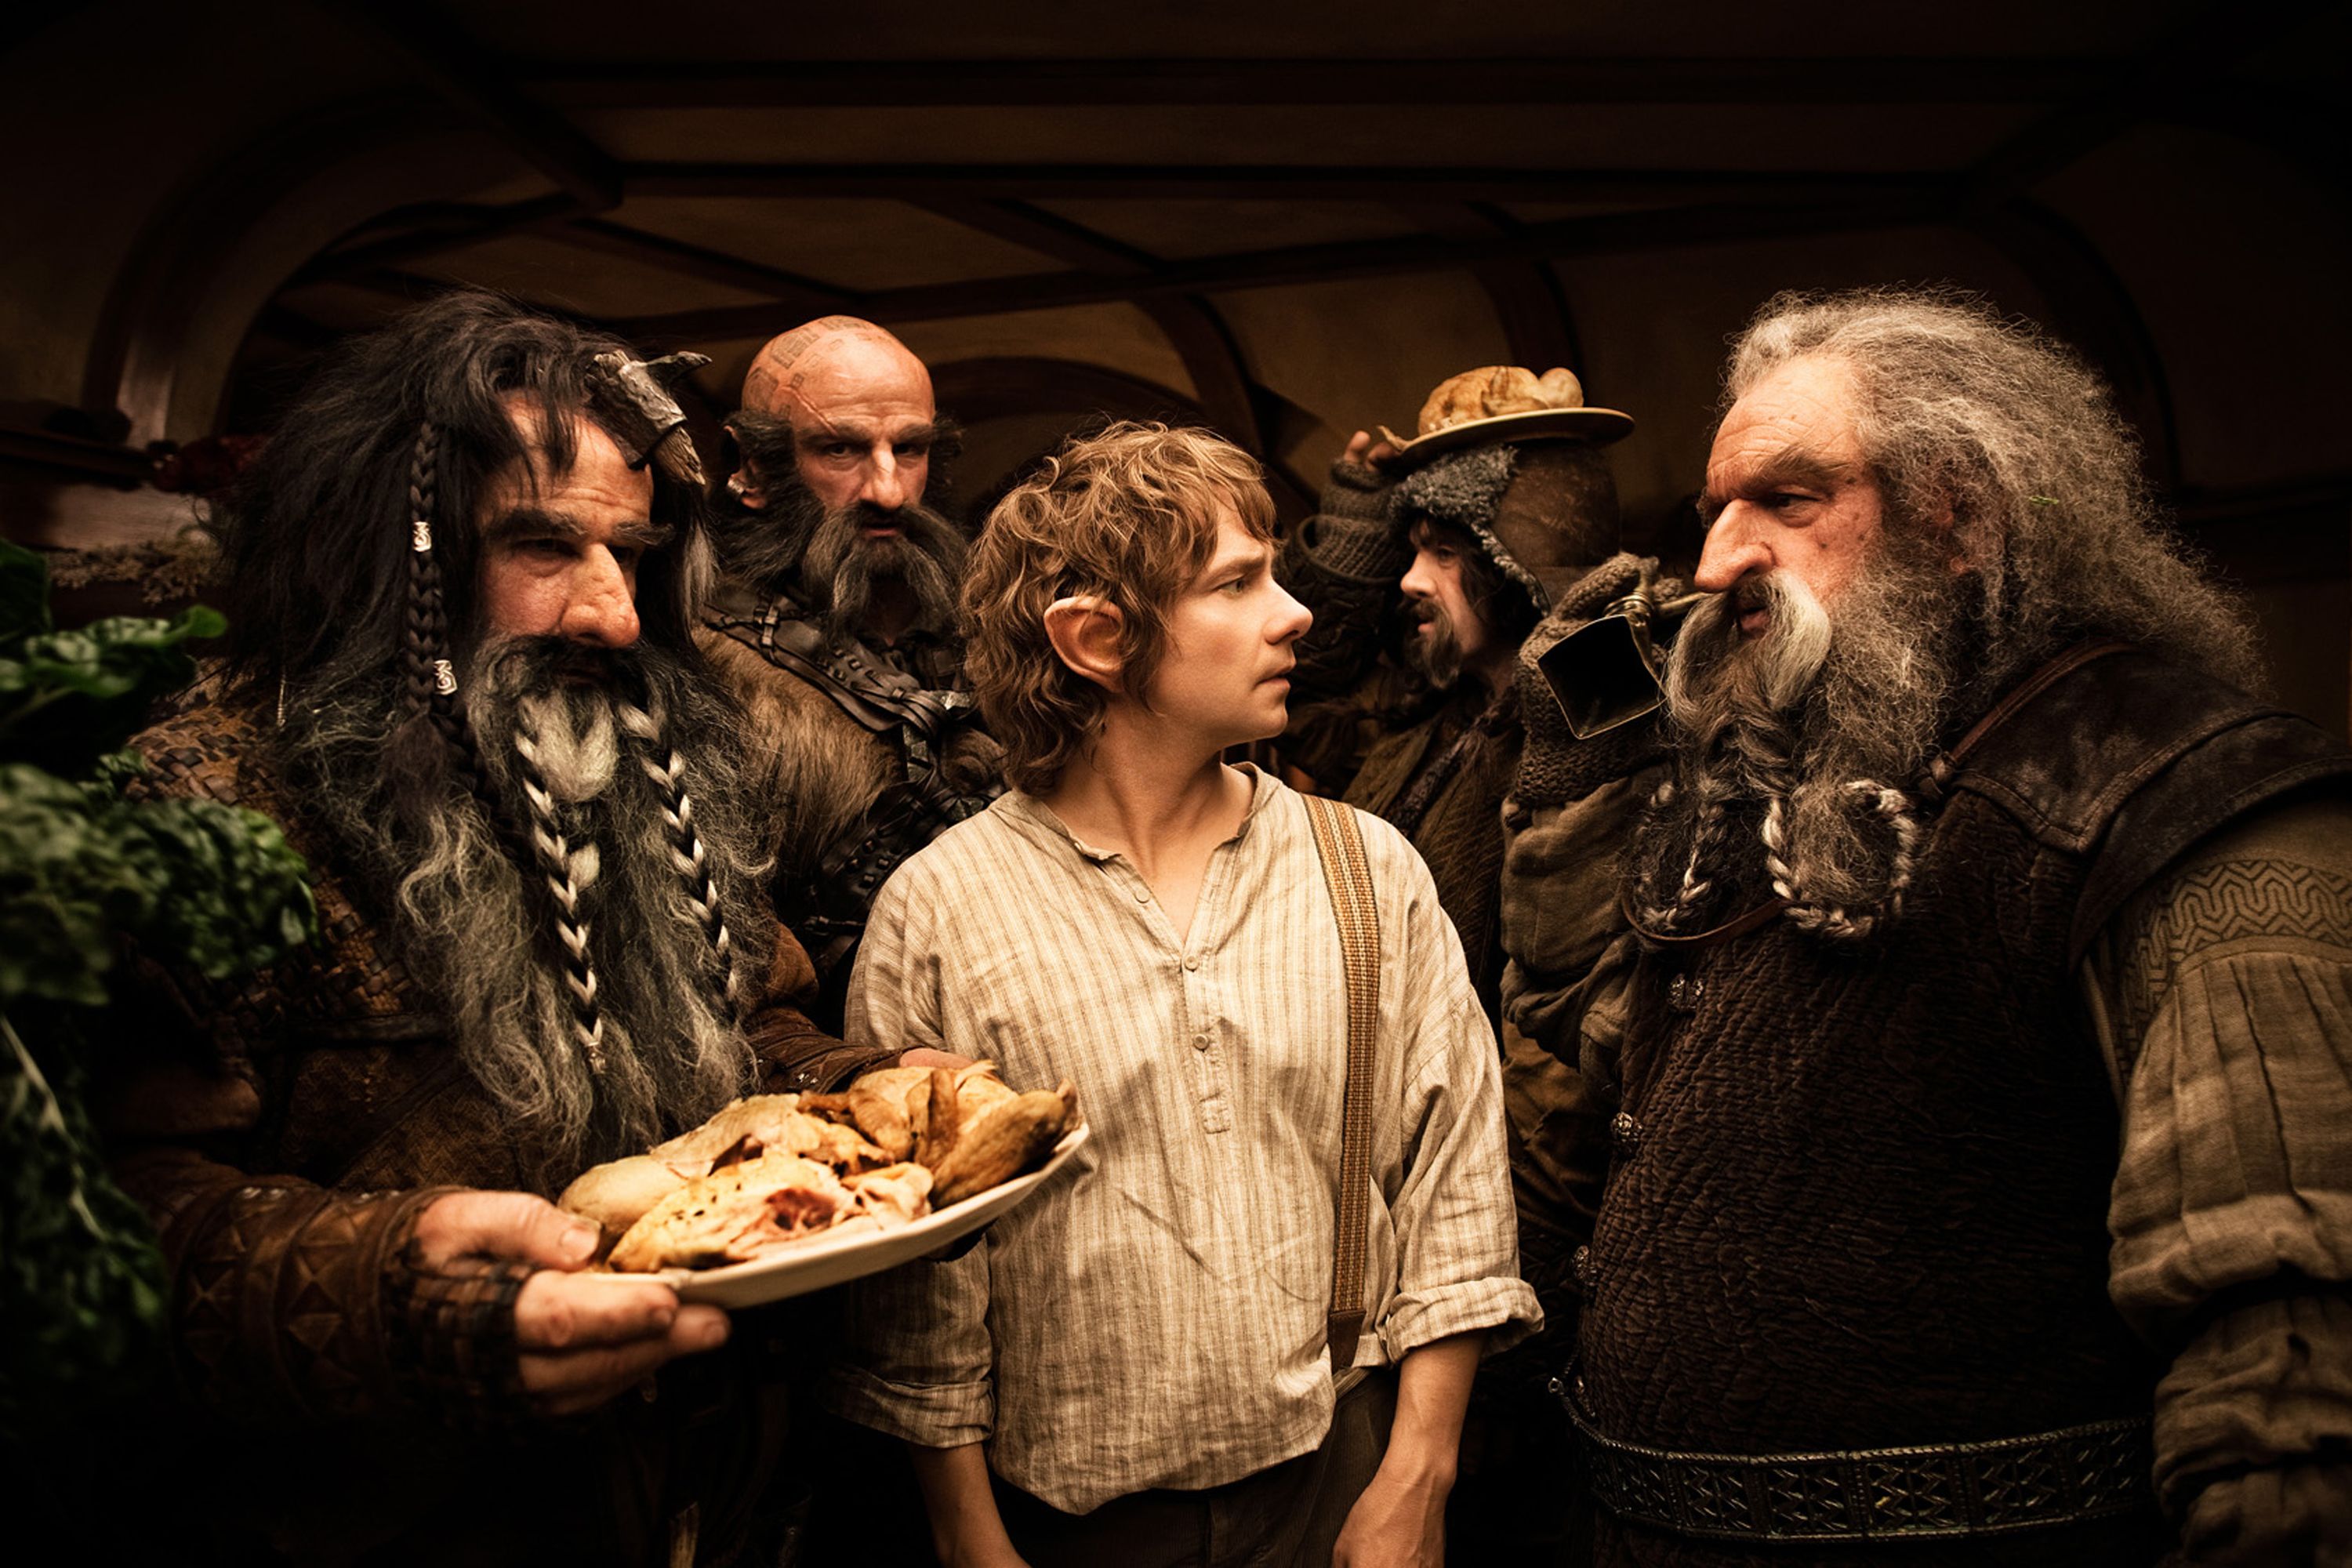 Lord of the Rings' uncredited Gimli actor speaks out for first